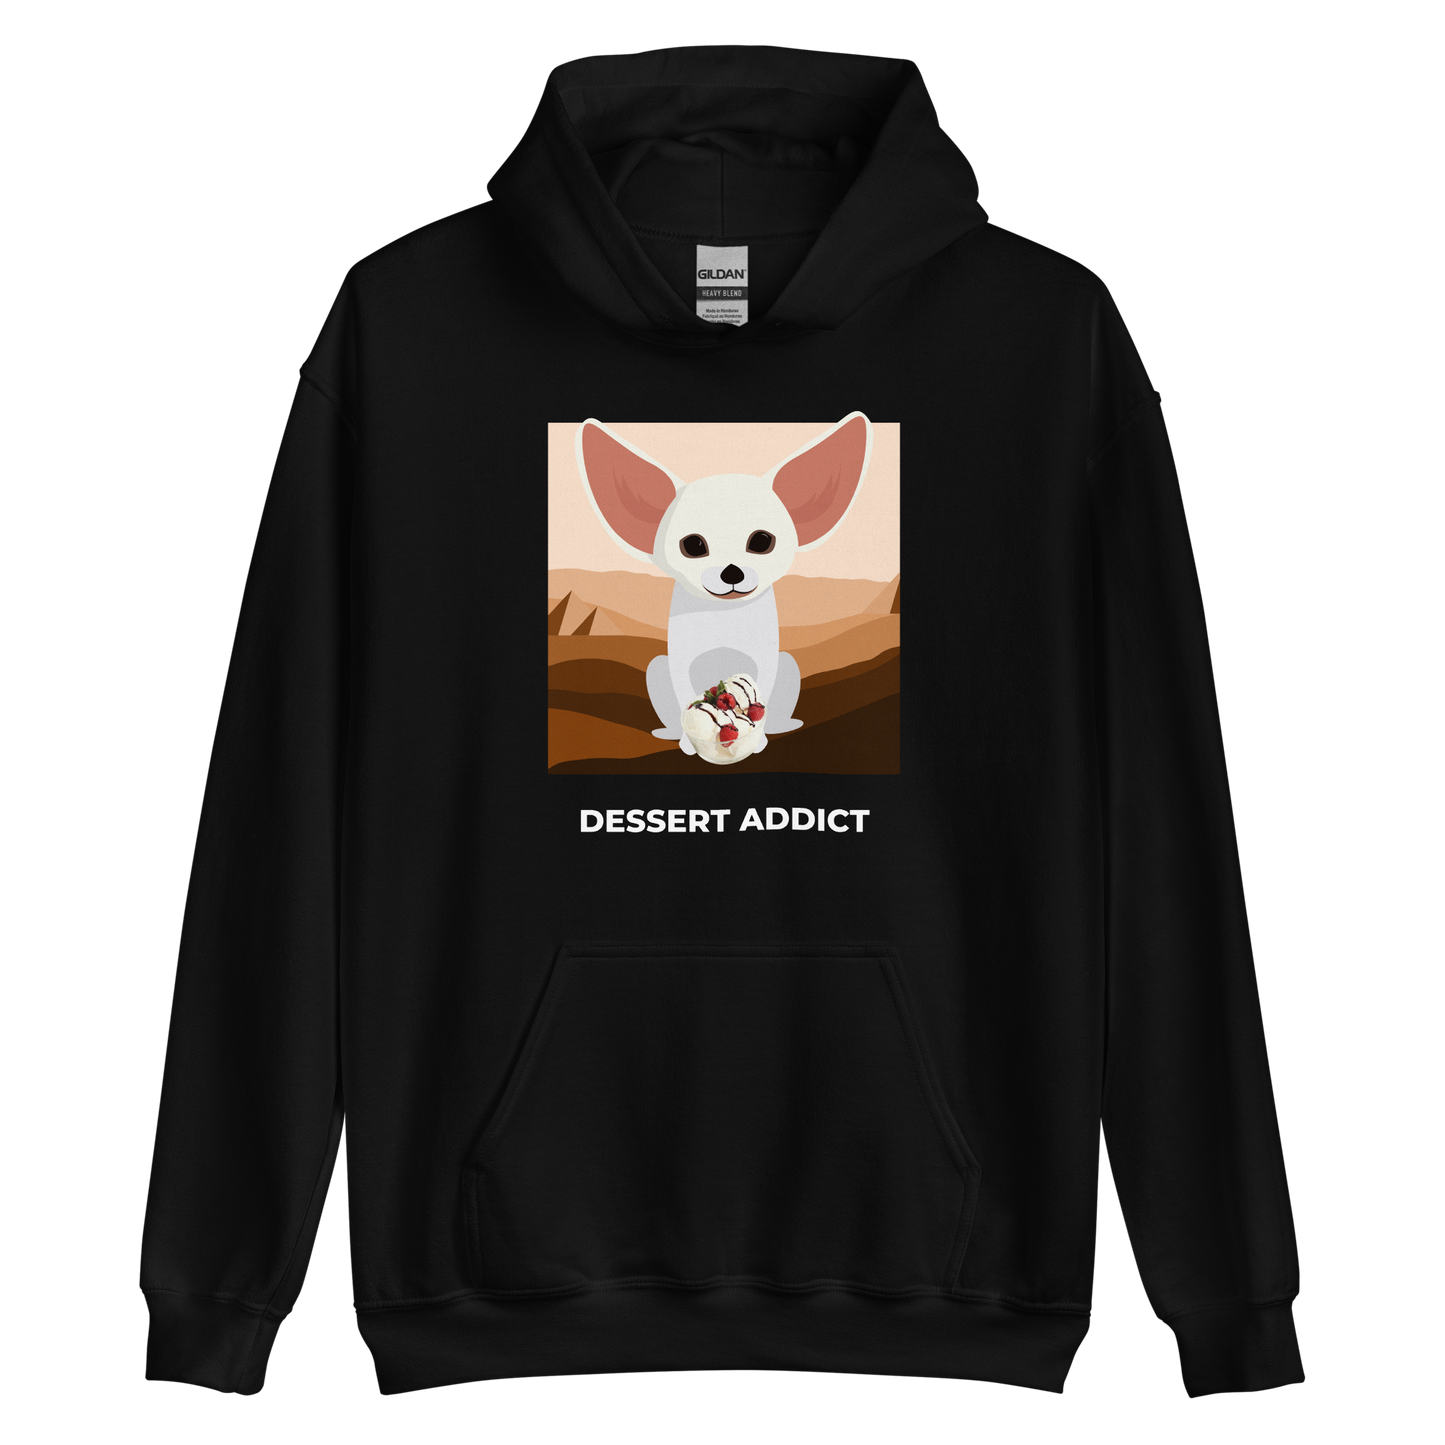 Black Fennec Fox Hoodie featuring an adorable Dessert Addict graphic on the chest - Funny Graphic Fennec Fox Hoodies - Boozy Fox